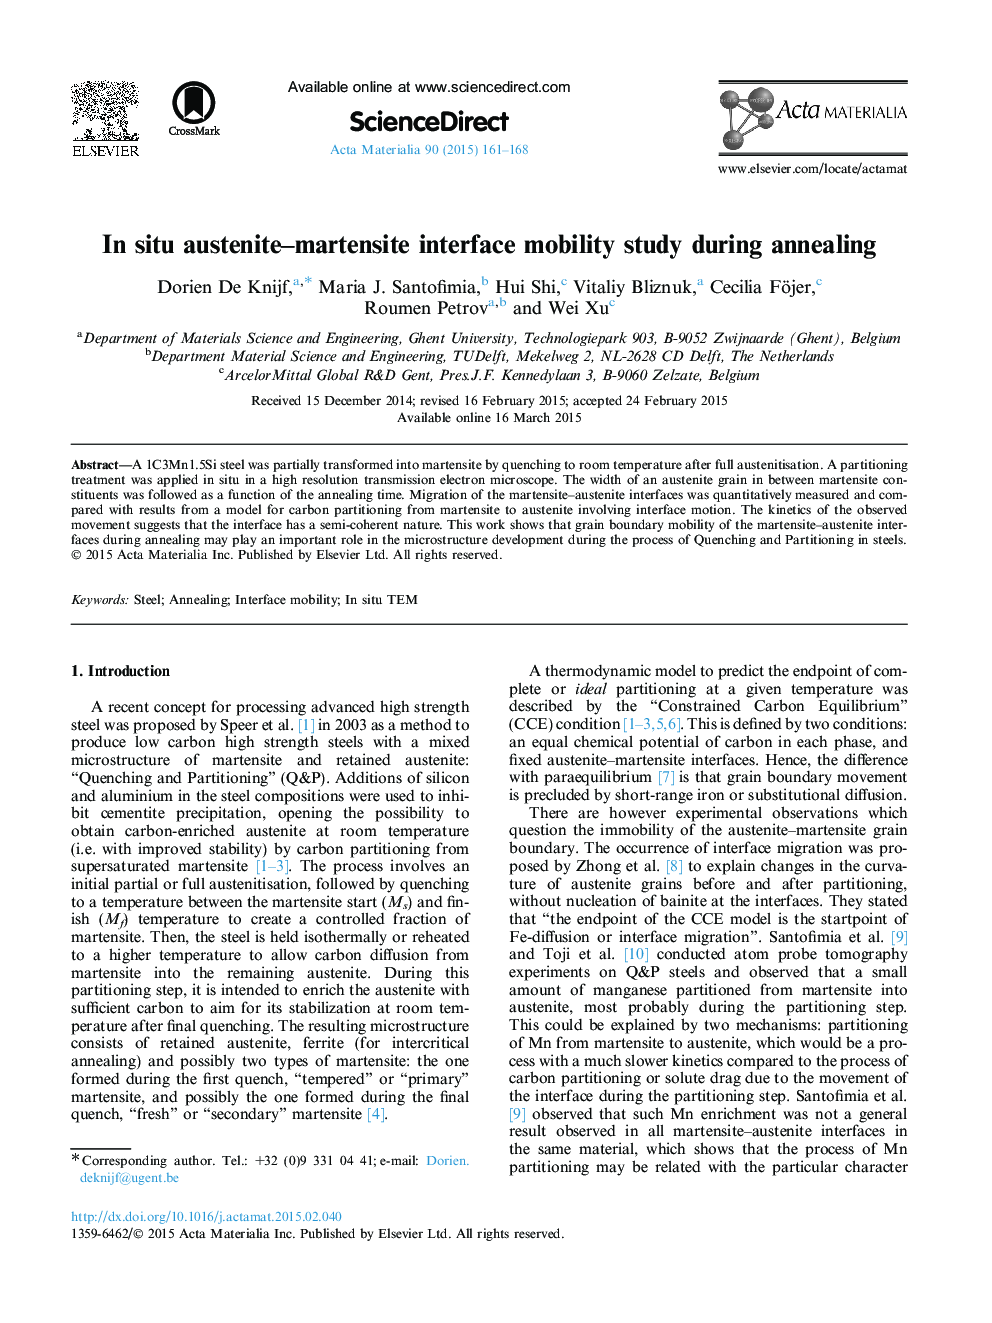 In situ austenite-martensite interface mobility study during annealing